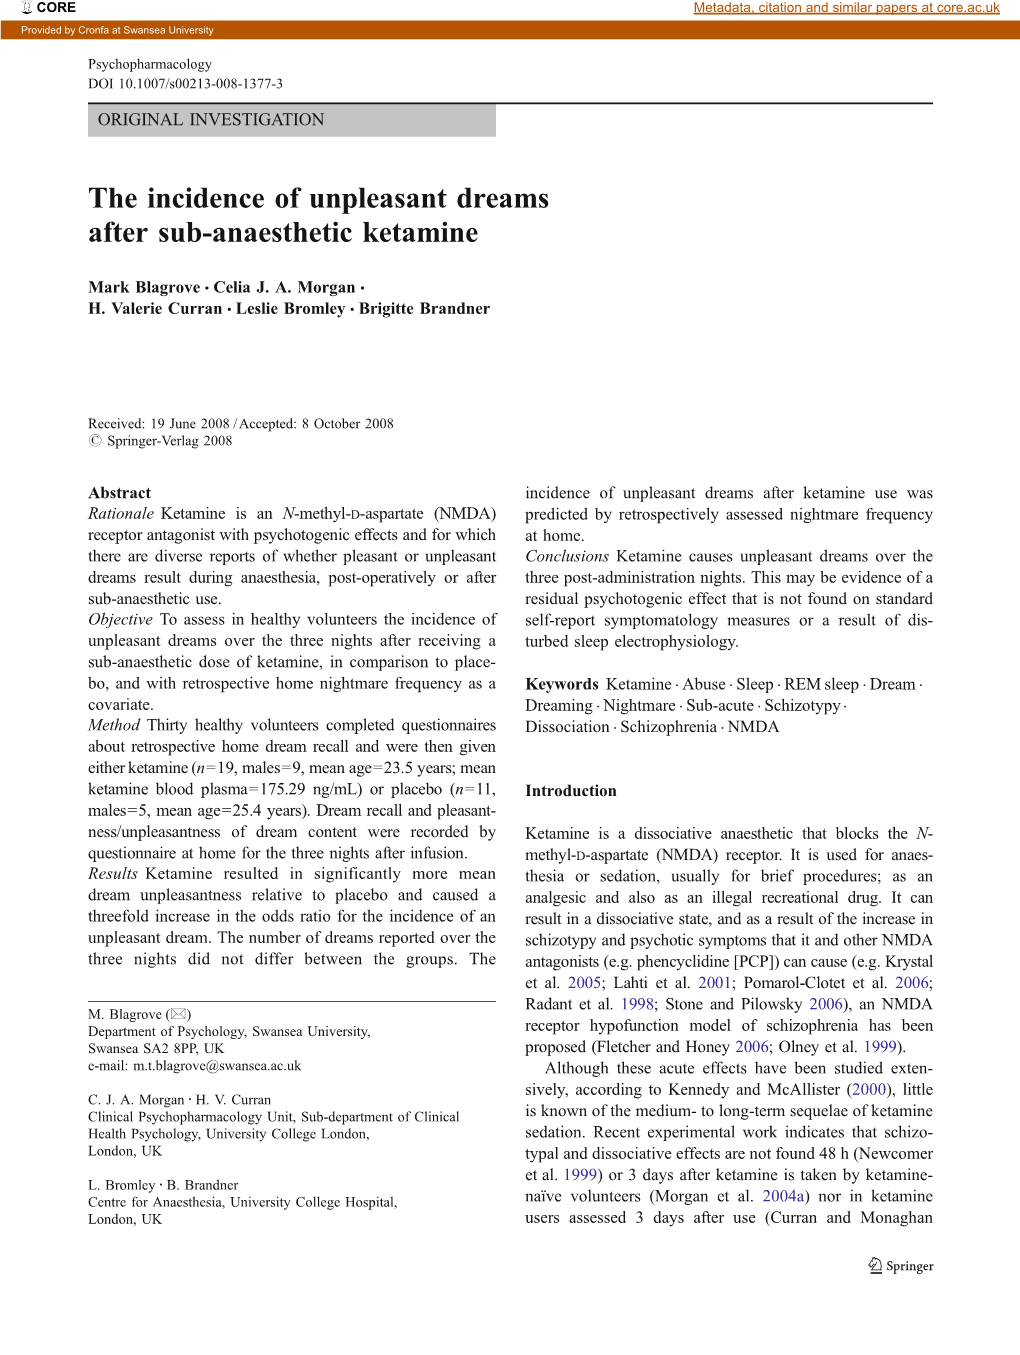 The Incidence of Unpleasant Dreams After Sub-Anaesthetic Ketamine